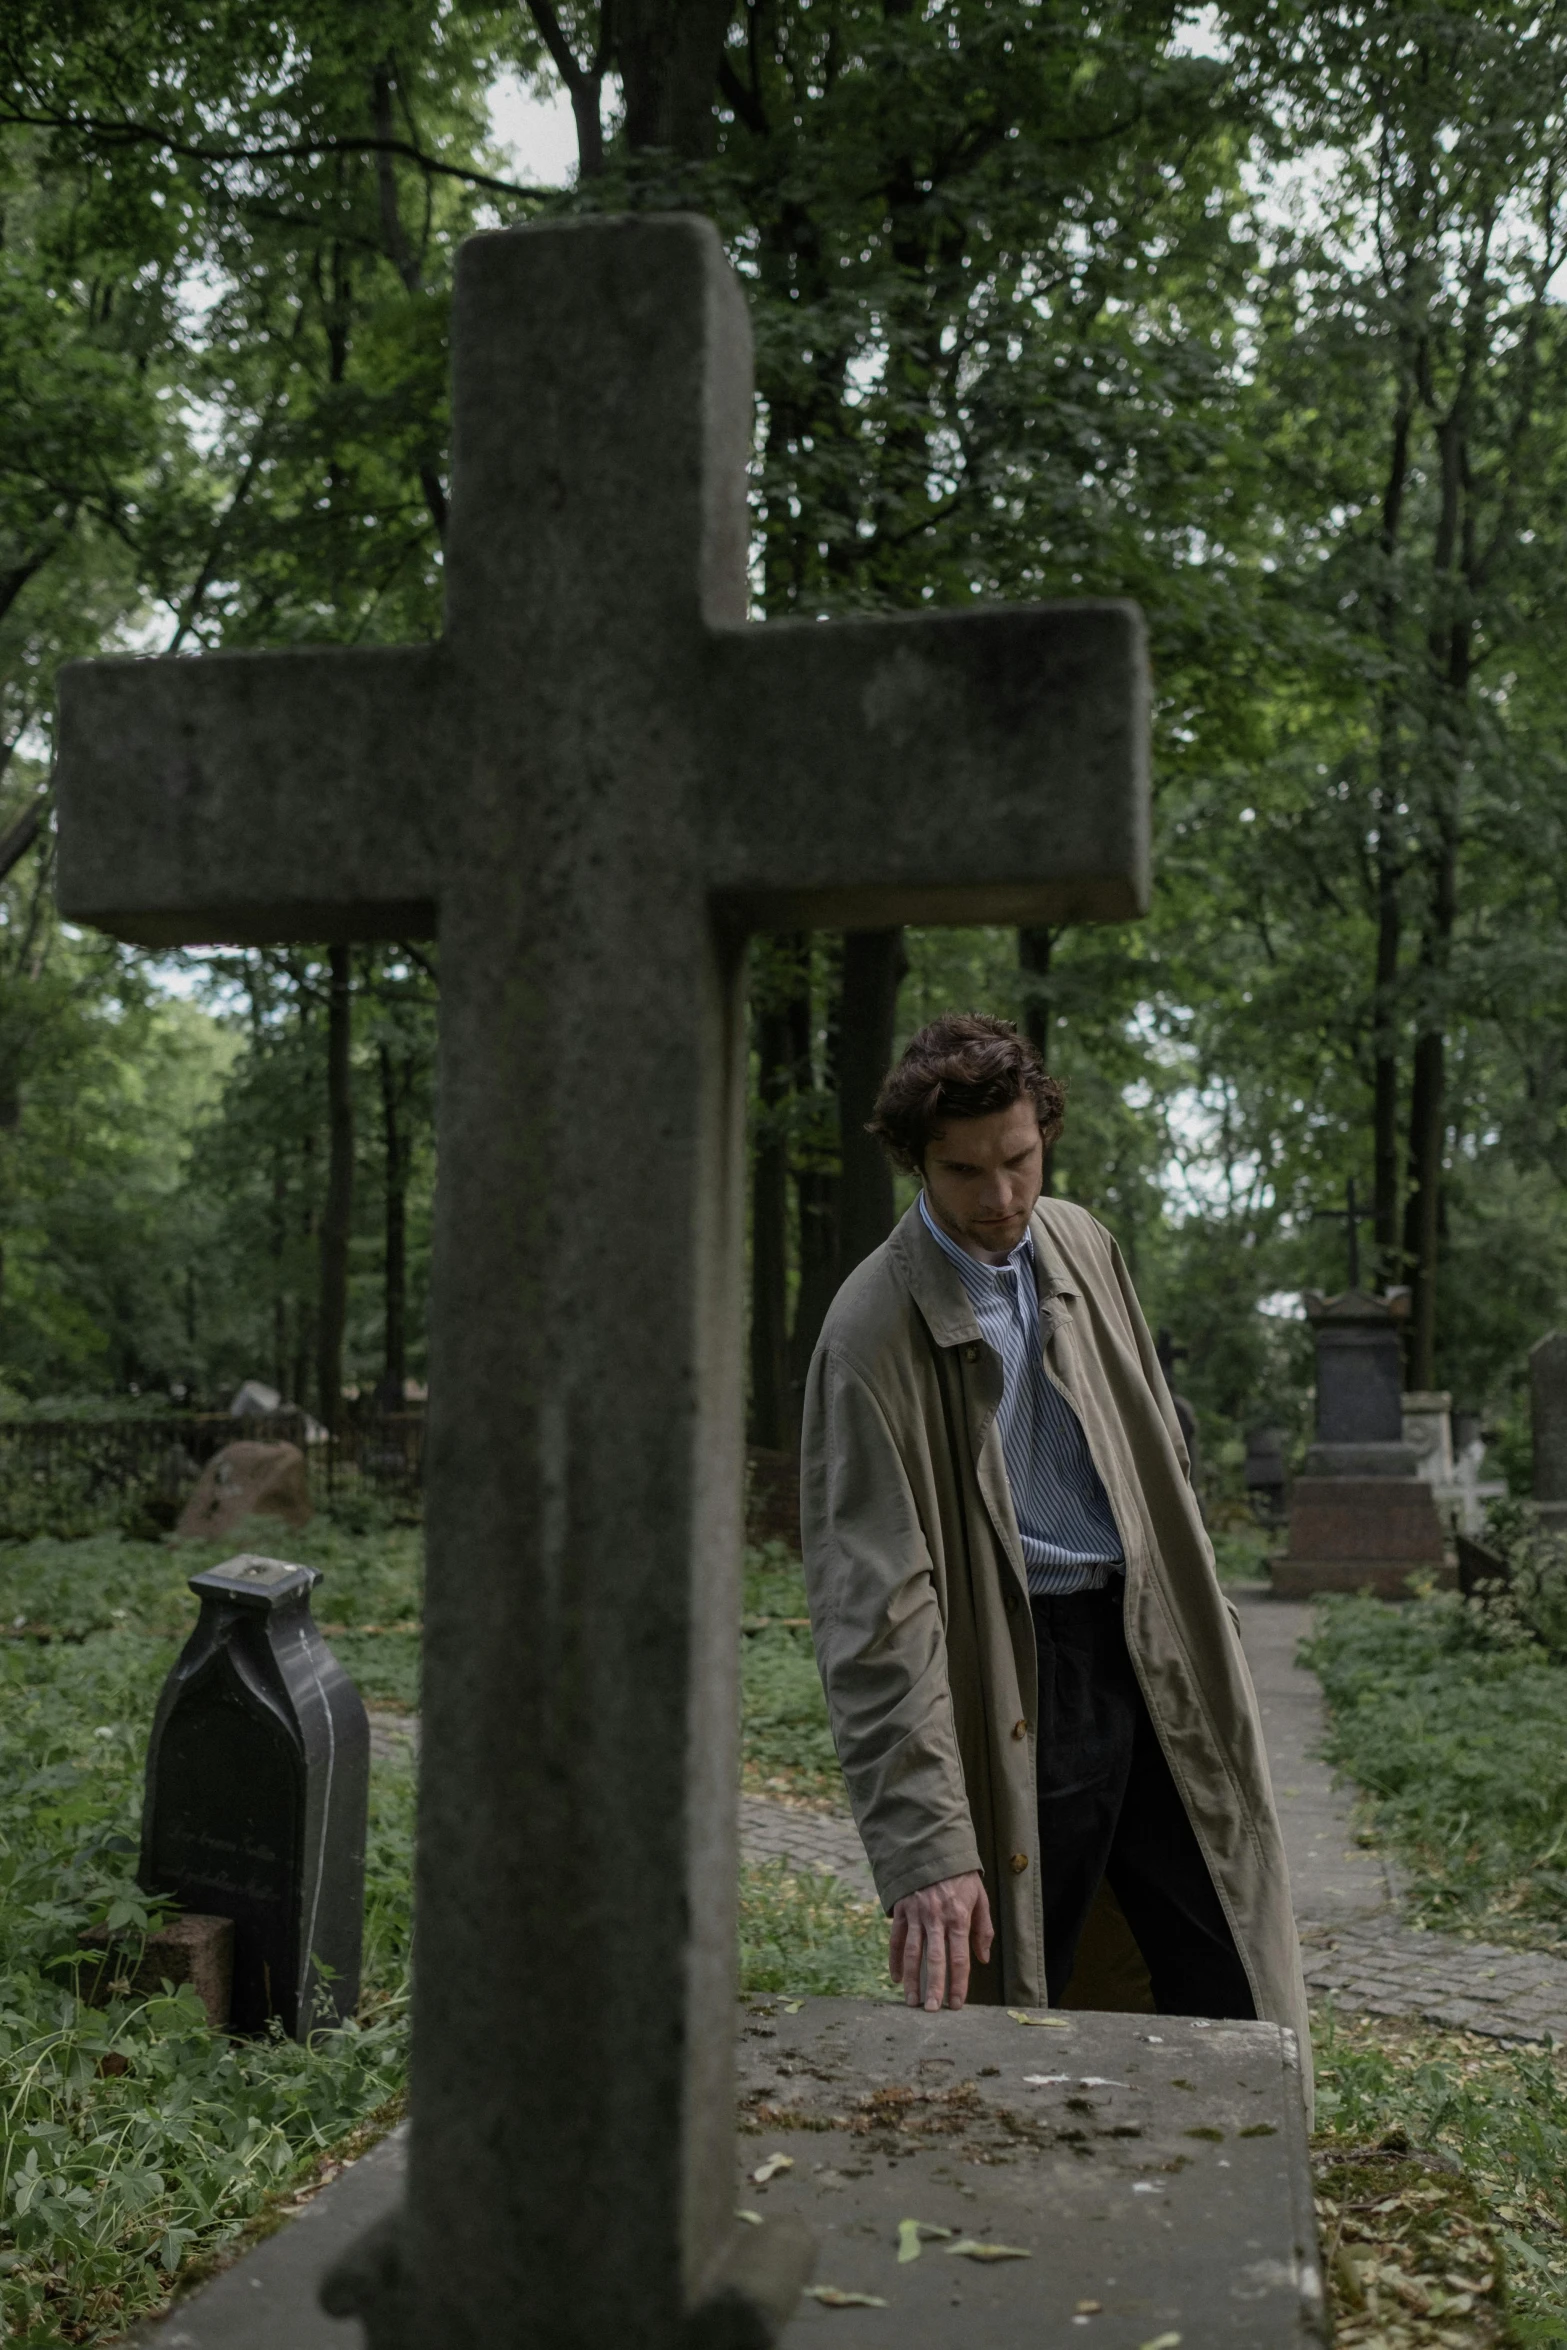 a man with a jacket and tie in a cemetery